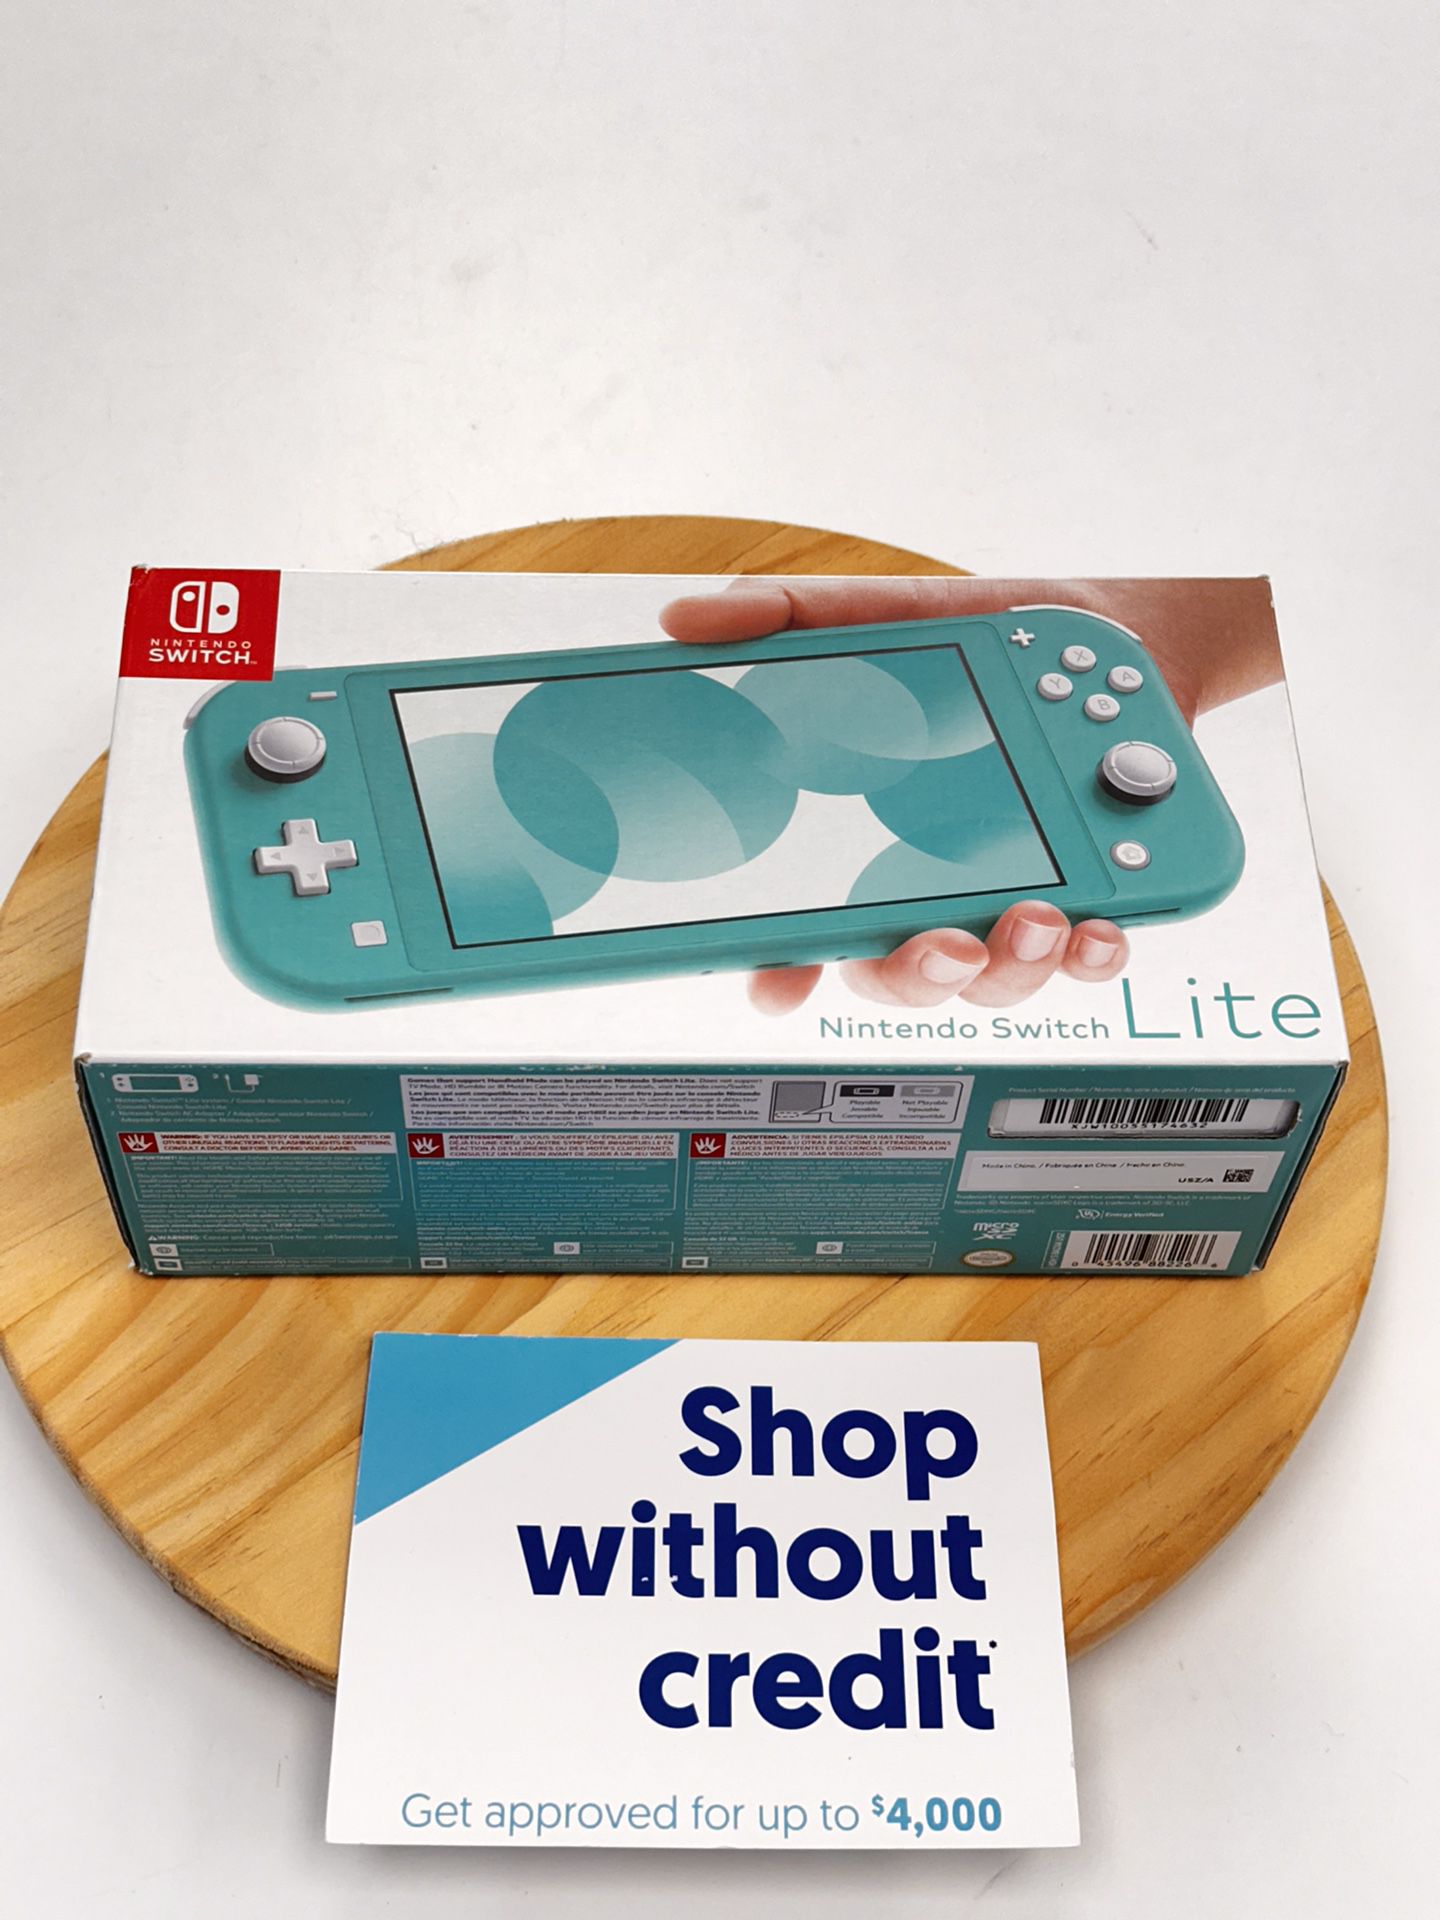 Nintendo Switch Lite - Pay $1 Today to Take it Home and Pay the Rest Later!